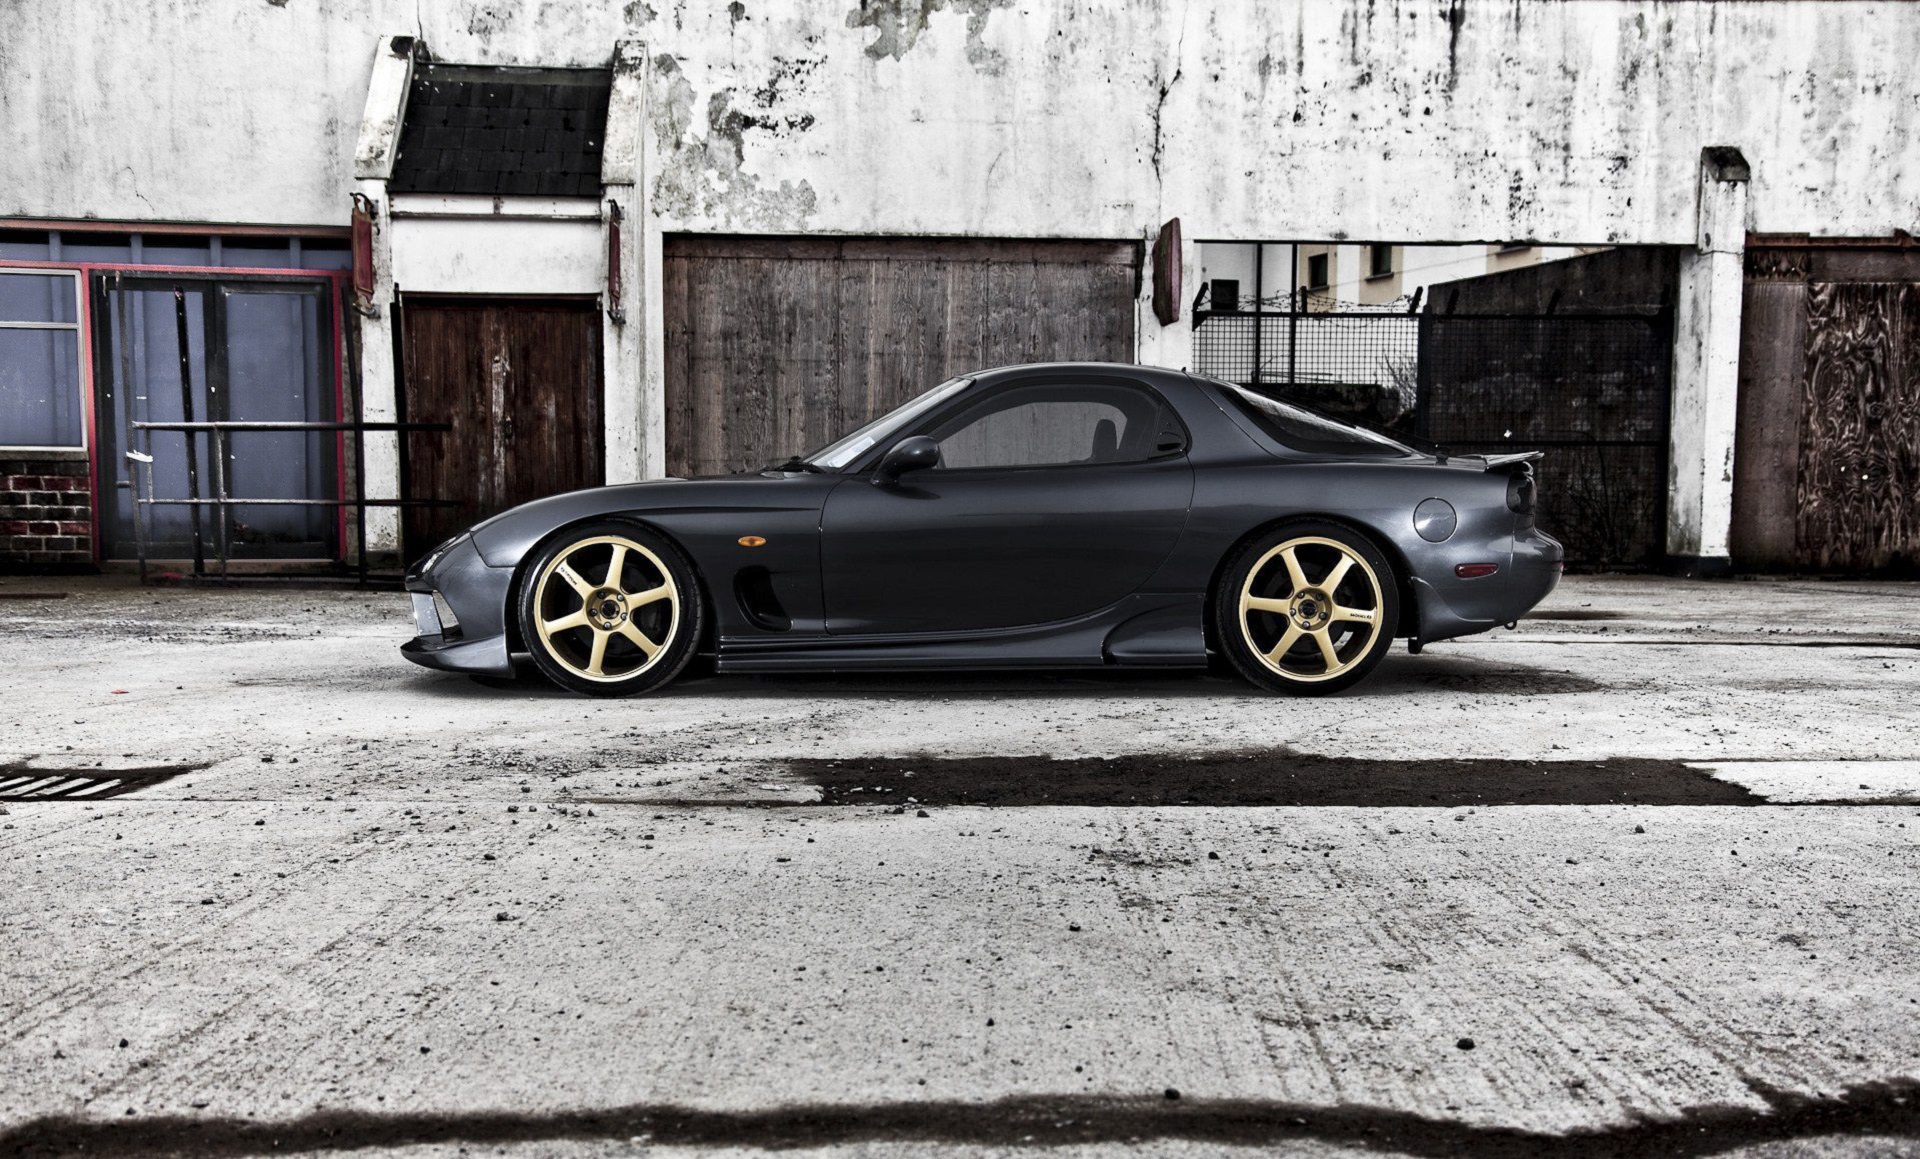 Mazda Rx 7 Wallpapers Images Photos Pictures Backgrounds Images, Photos, Reviews